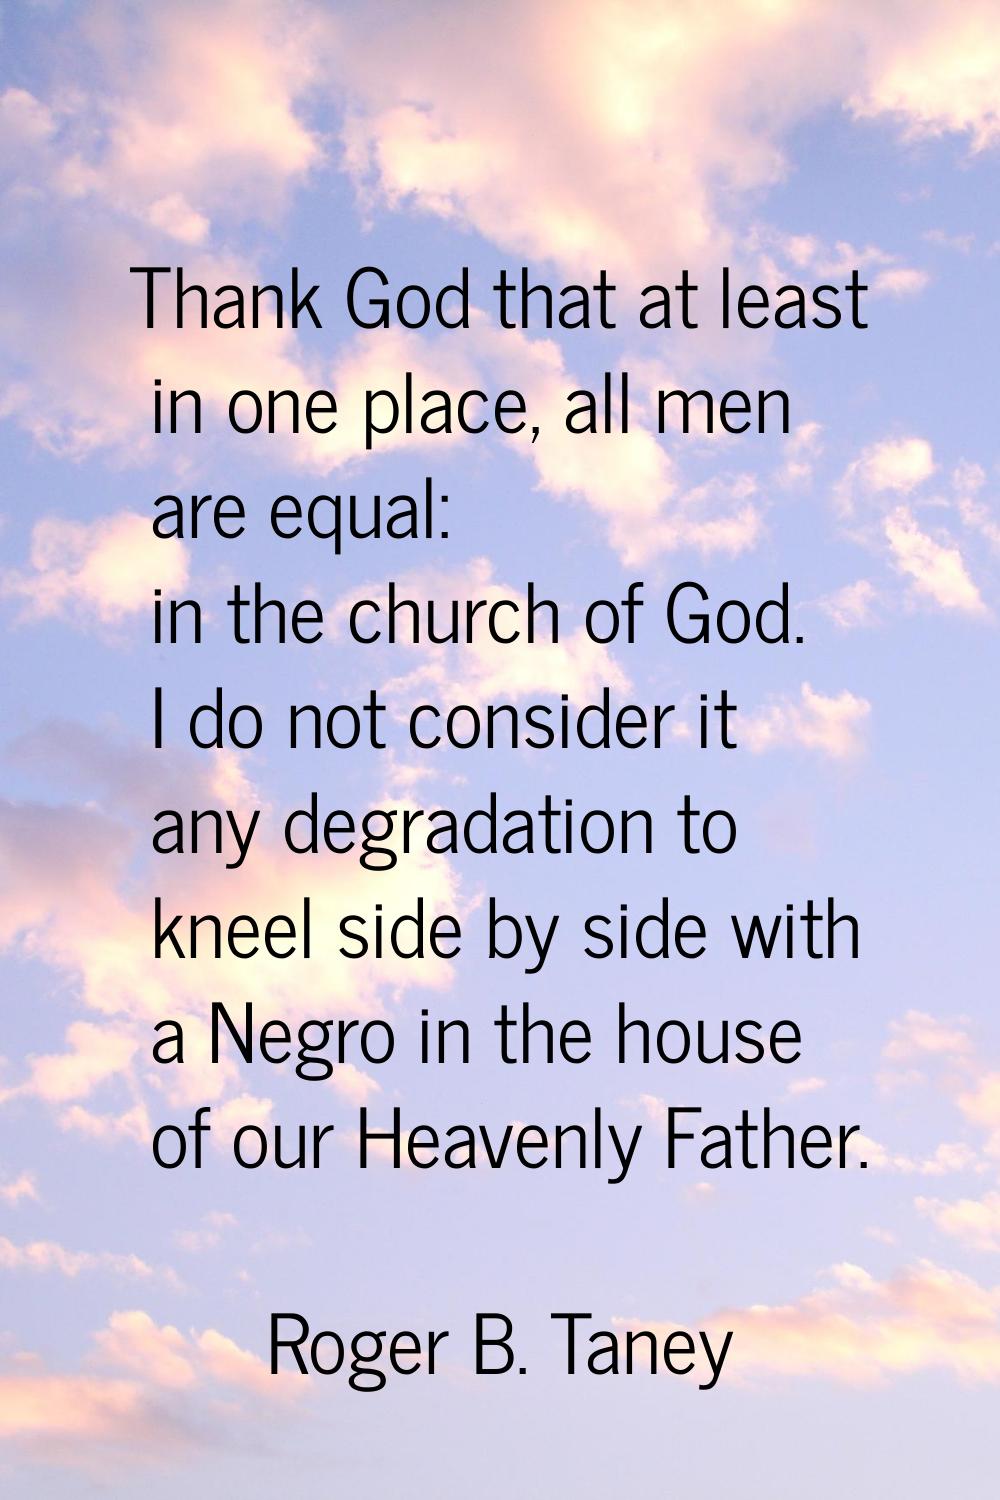 Thank God that at least in one place, all men are equal: in the church of God. I do not consider it